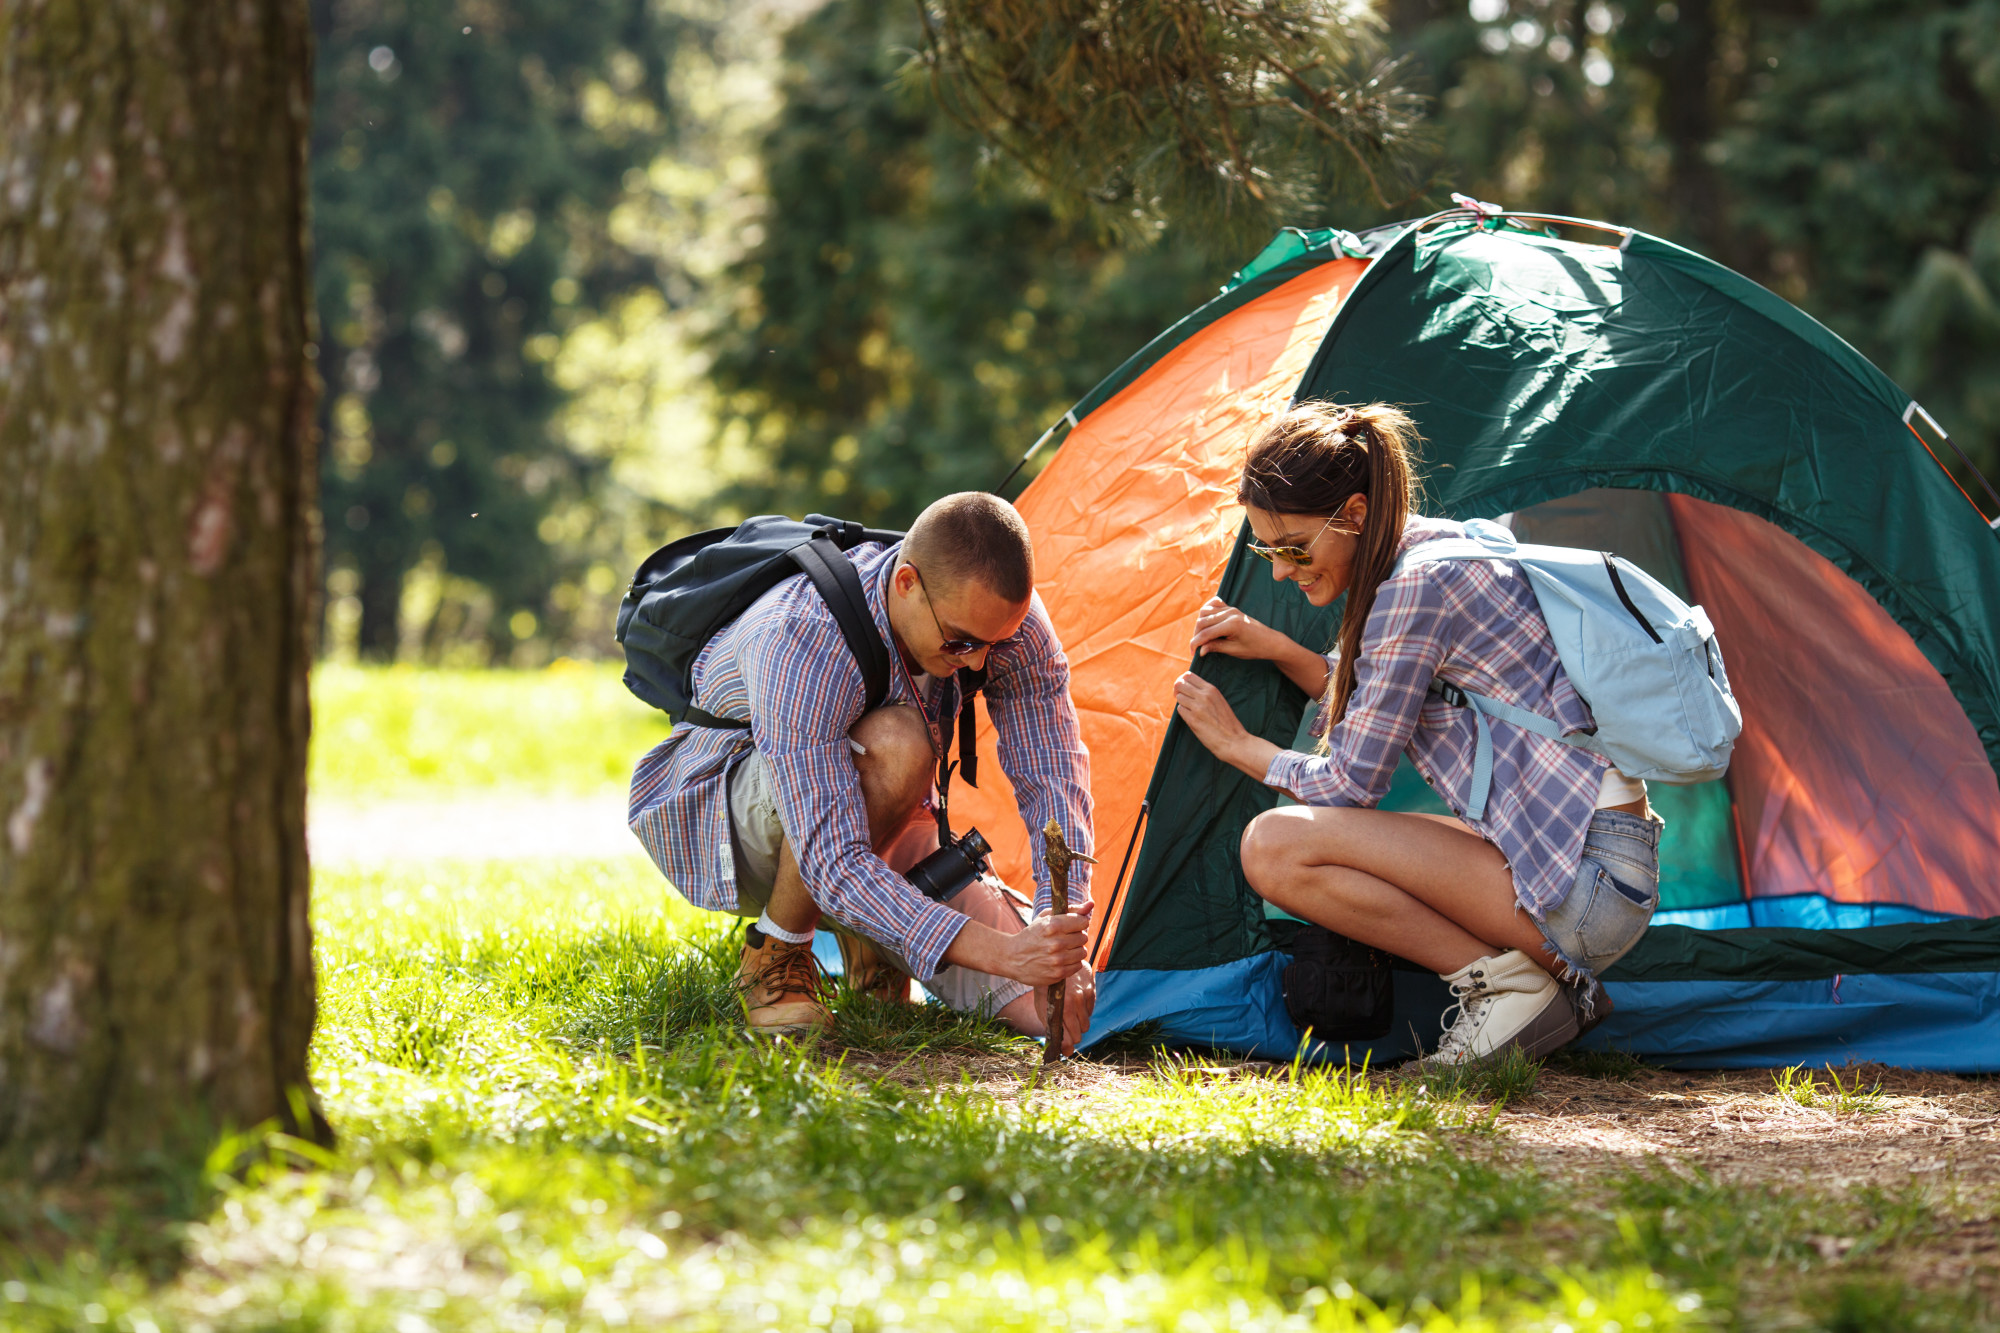 A Beginner's Guide To What To Bring On A Camping Trip